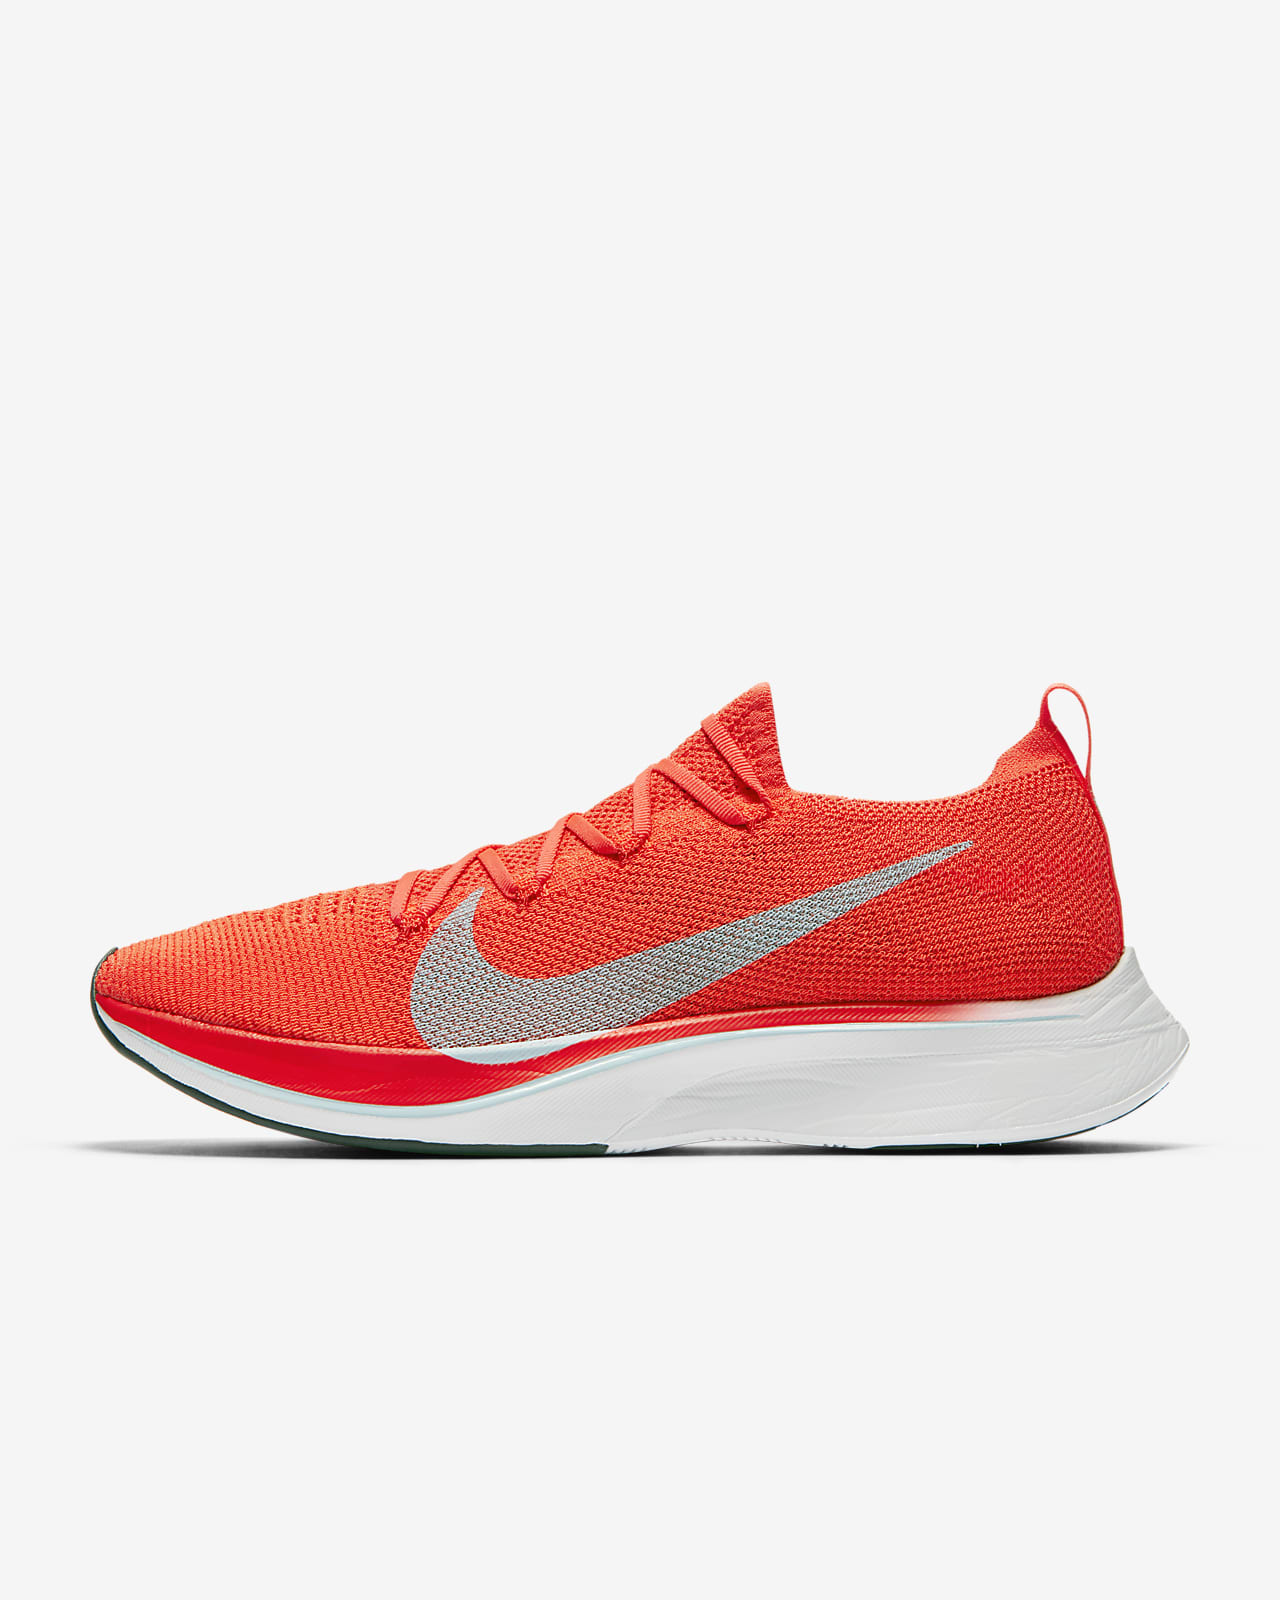 nike shoes for running and walking